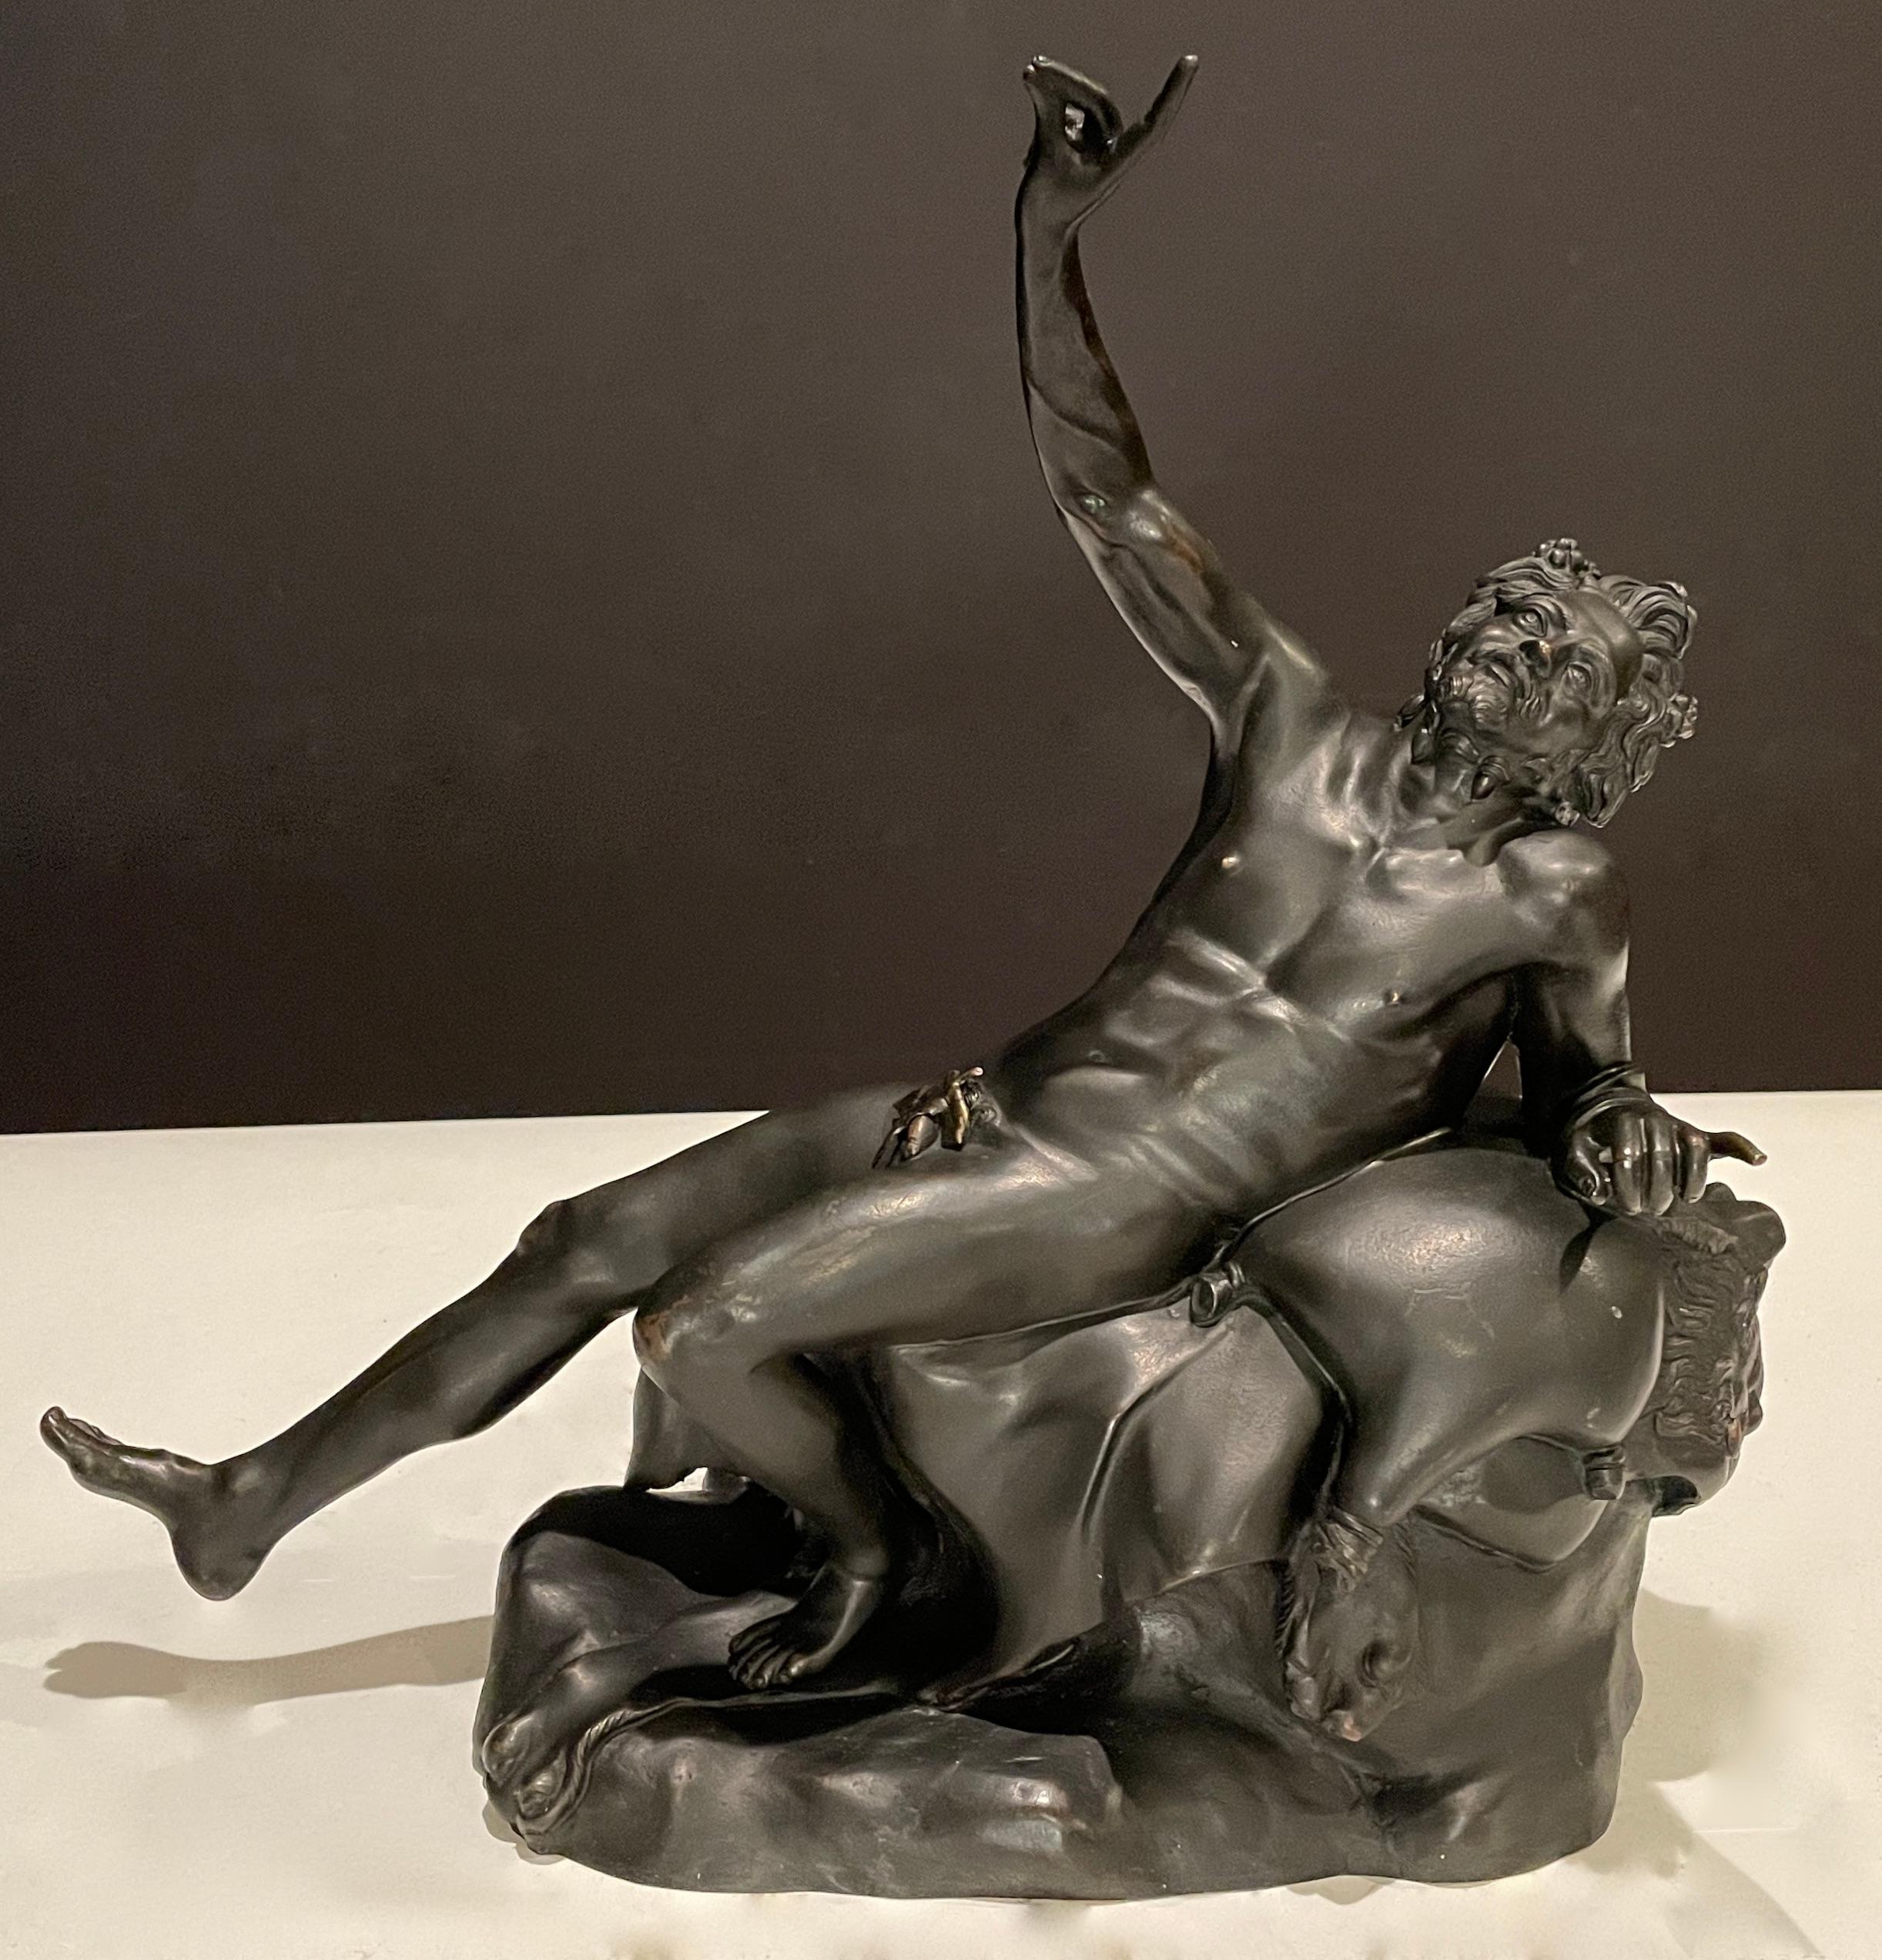 Fine quality original 19th century Italian patinated bronze Grand Tour model of Bacchus reclining on a lion hide with a wine bladder by his side.

About The Grand Tour

From around the middle of the 17th century, young, wealthy graduates of